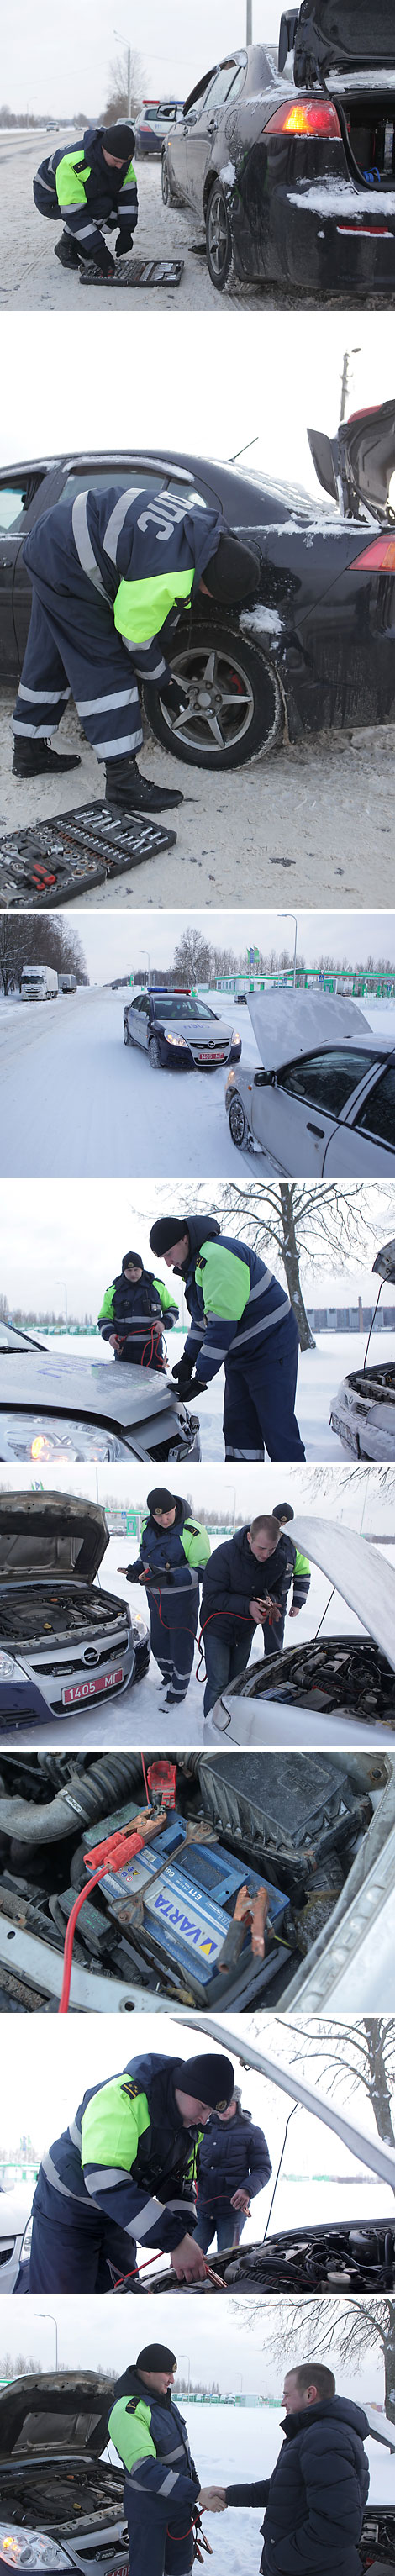 Belarusian traffic police help out drivers in distress